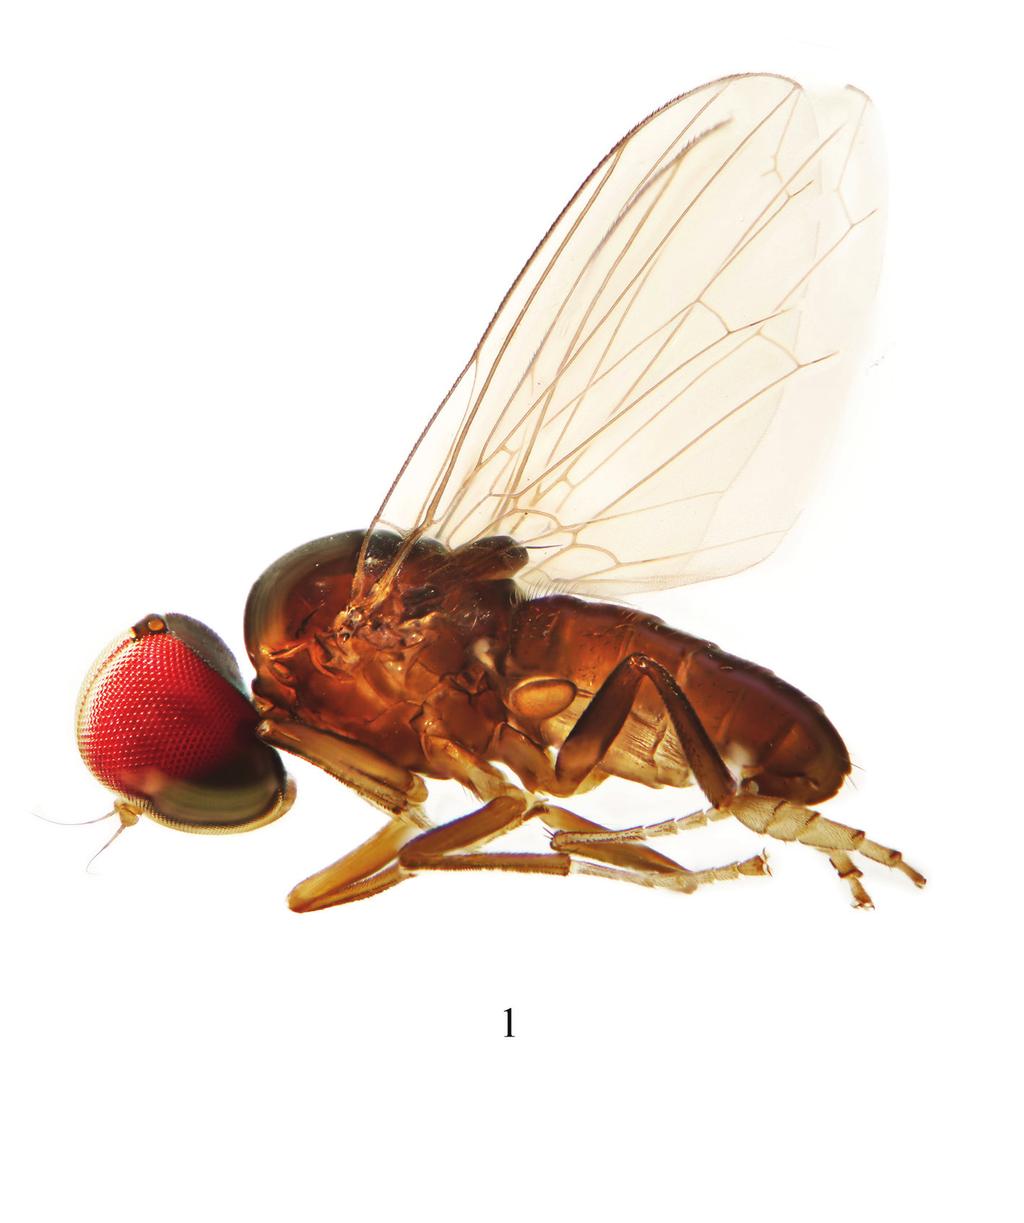 59 Linderomyia of Laos Kessel EL, and Maggioncalda EA (1968) A revision of the genera of Platypezidae with the descriptions of five new genera and consideration of phylogeny, circumversion and